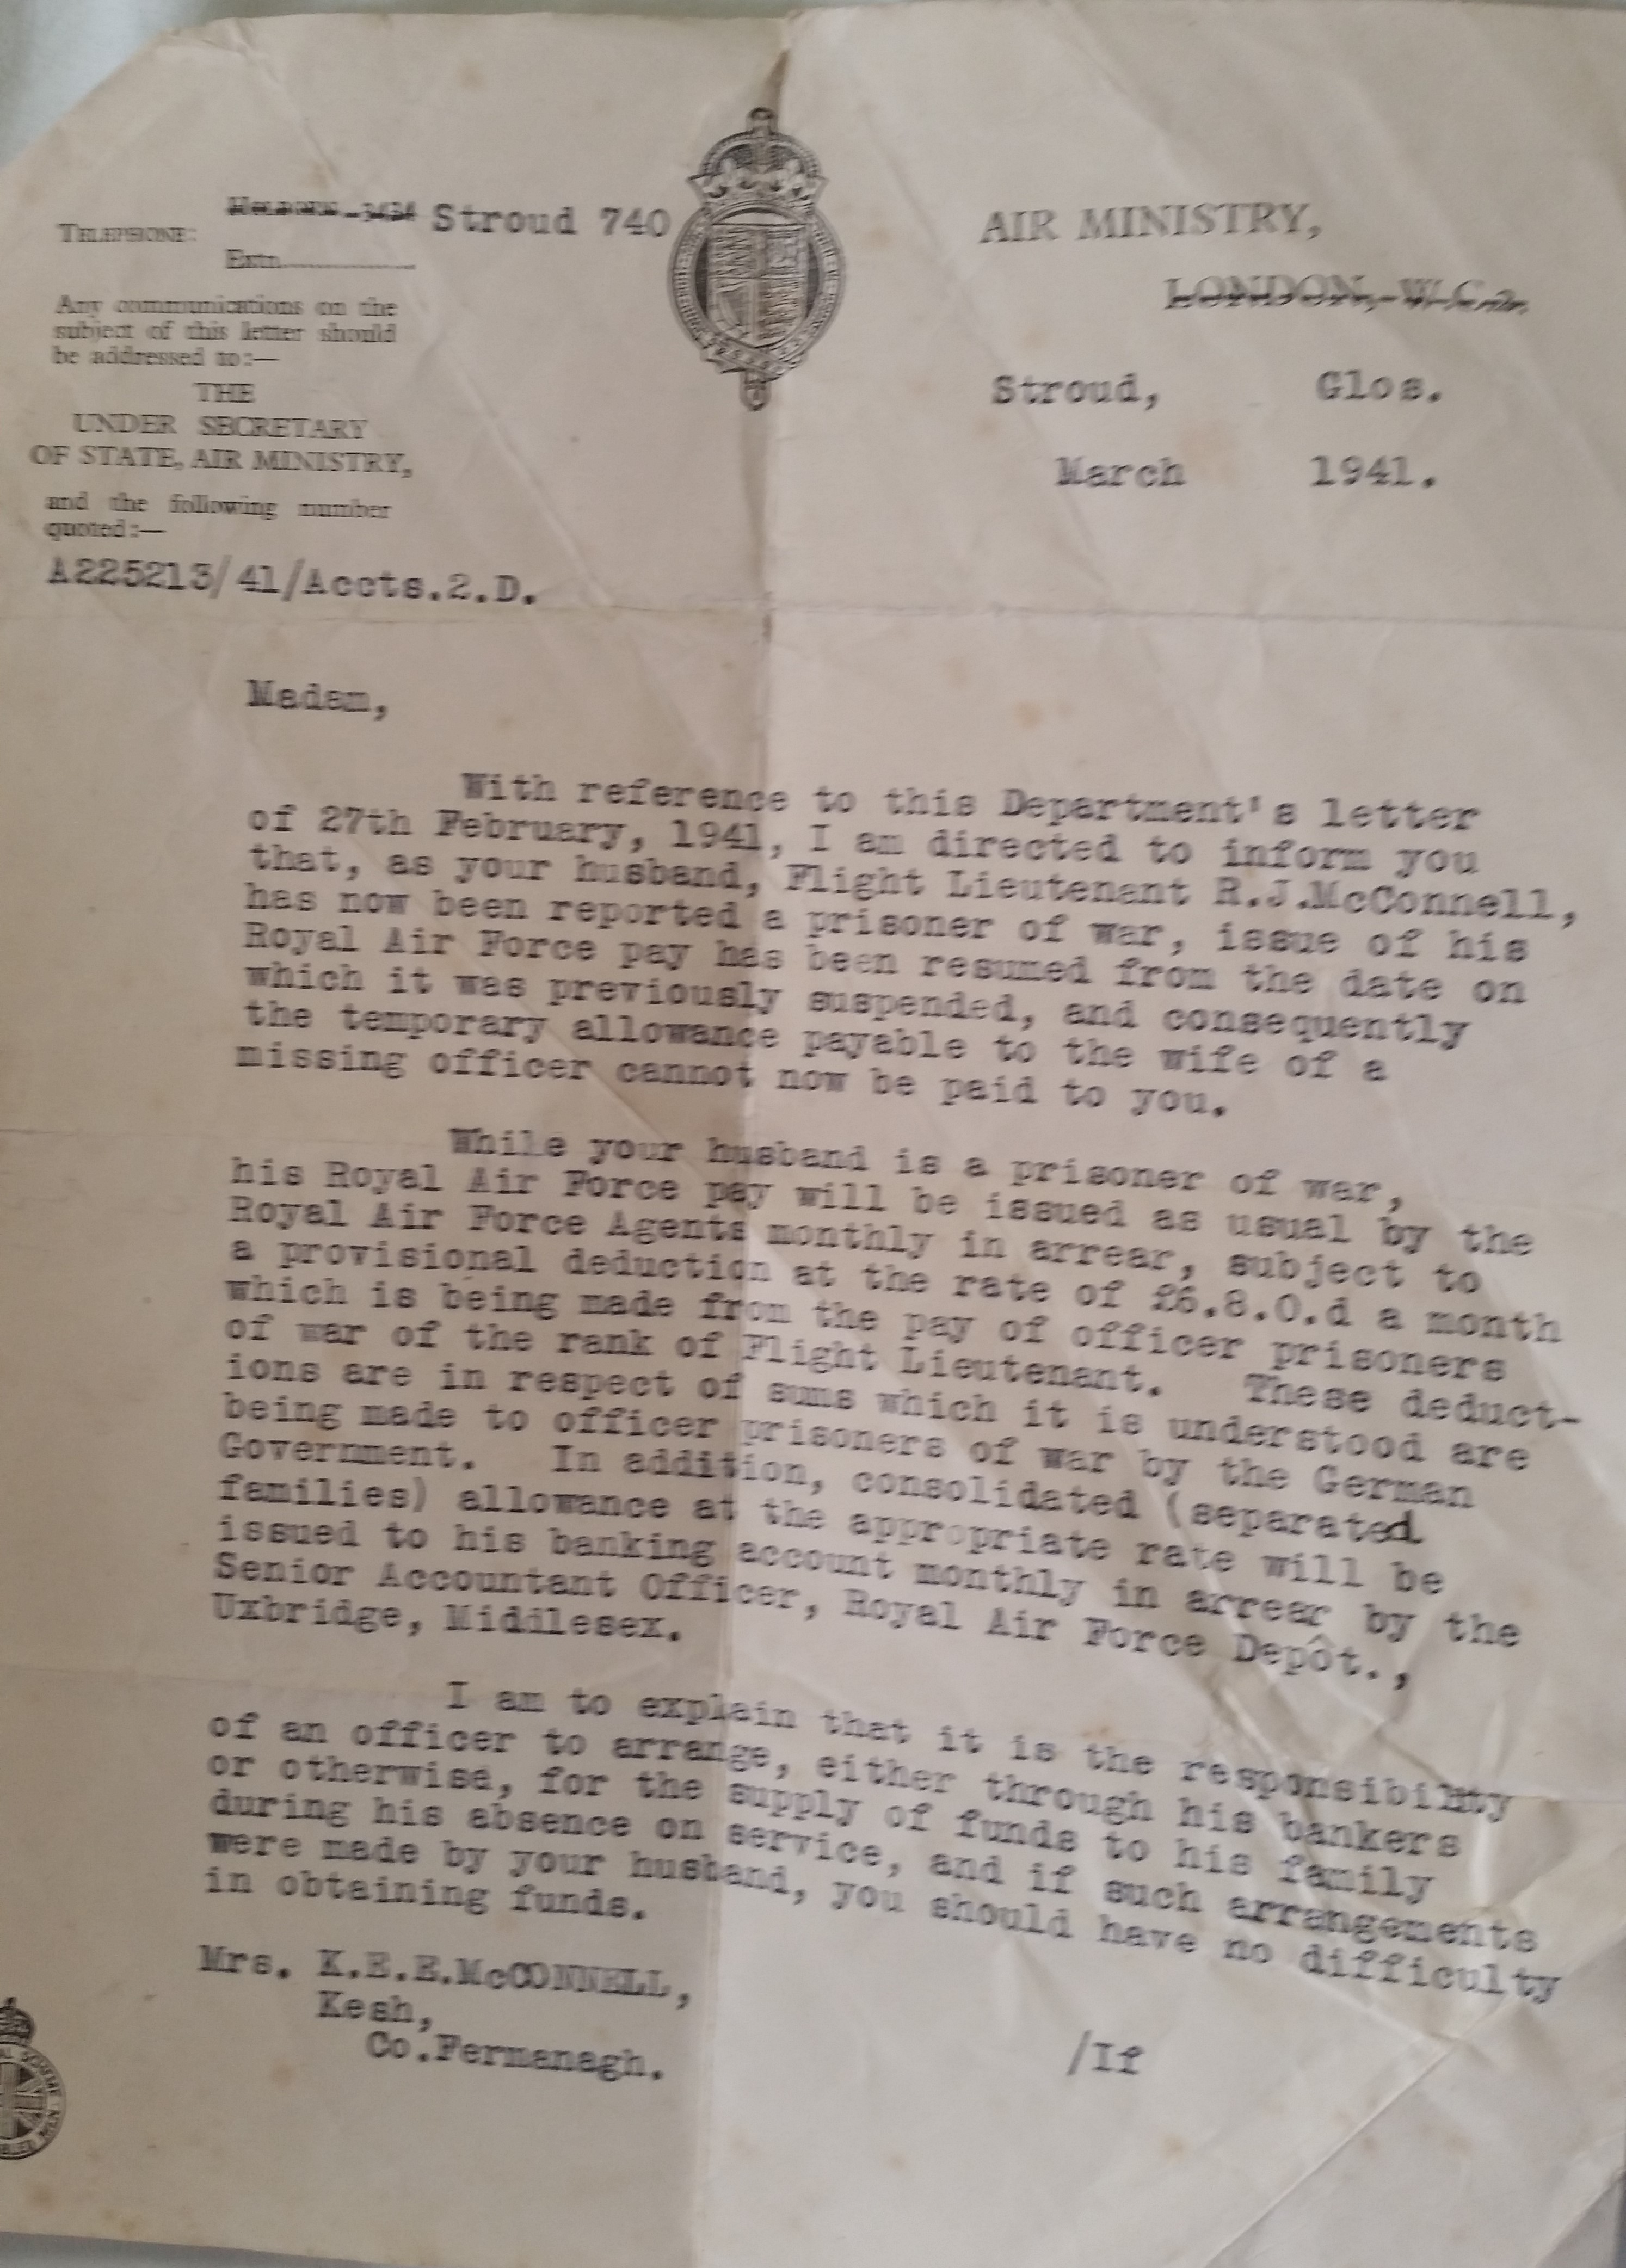 march-1941-letter-re-pay-air-ministry-1of2